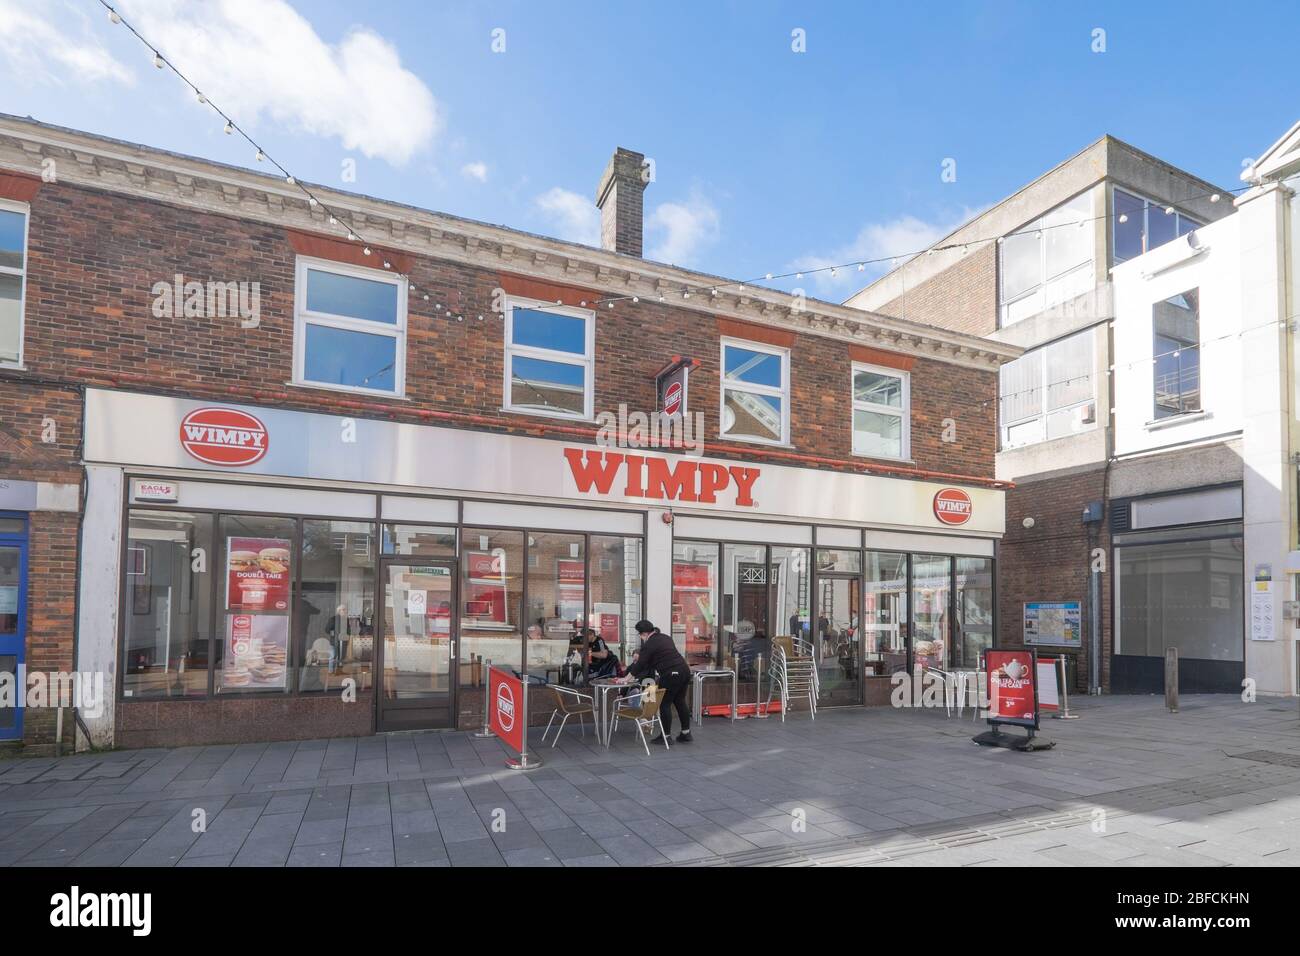 Ashford, Kent, United Kingdom - March 9, 2020: Wimpy burger and fast food restaurant on Tufton Street in Ashford town centre, UK Stock Photo